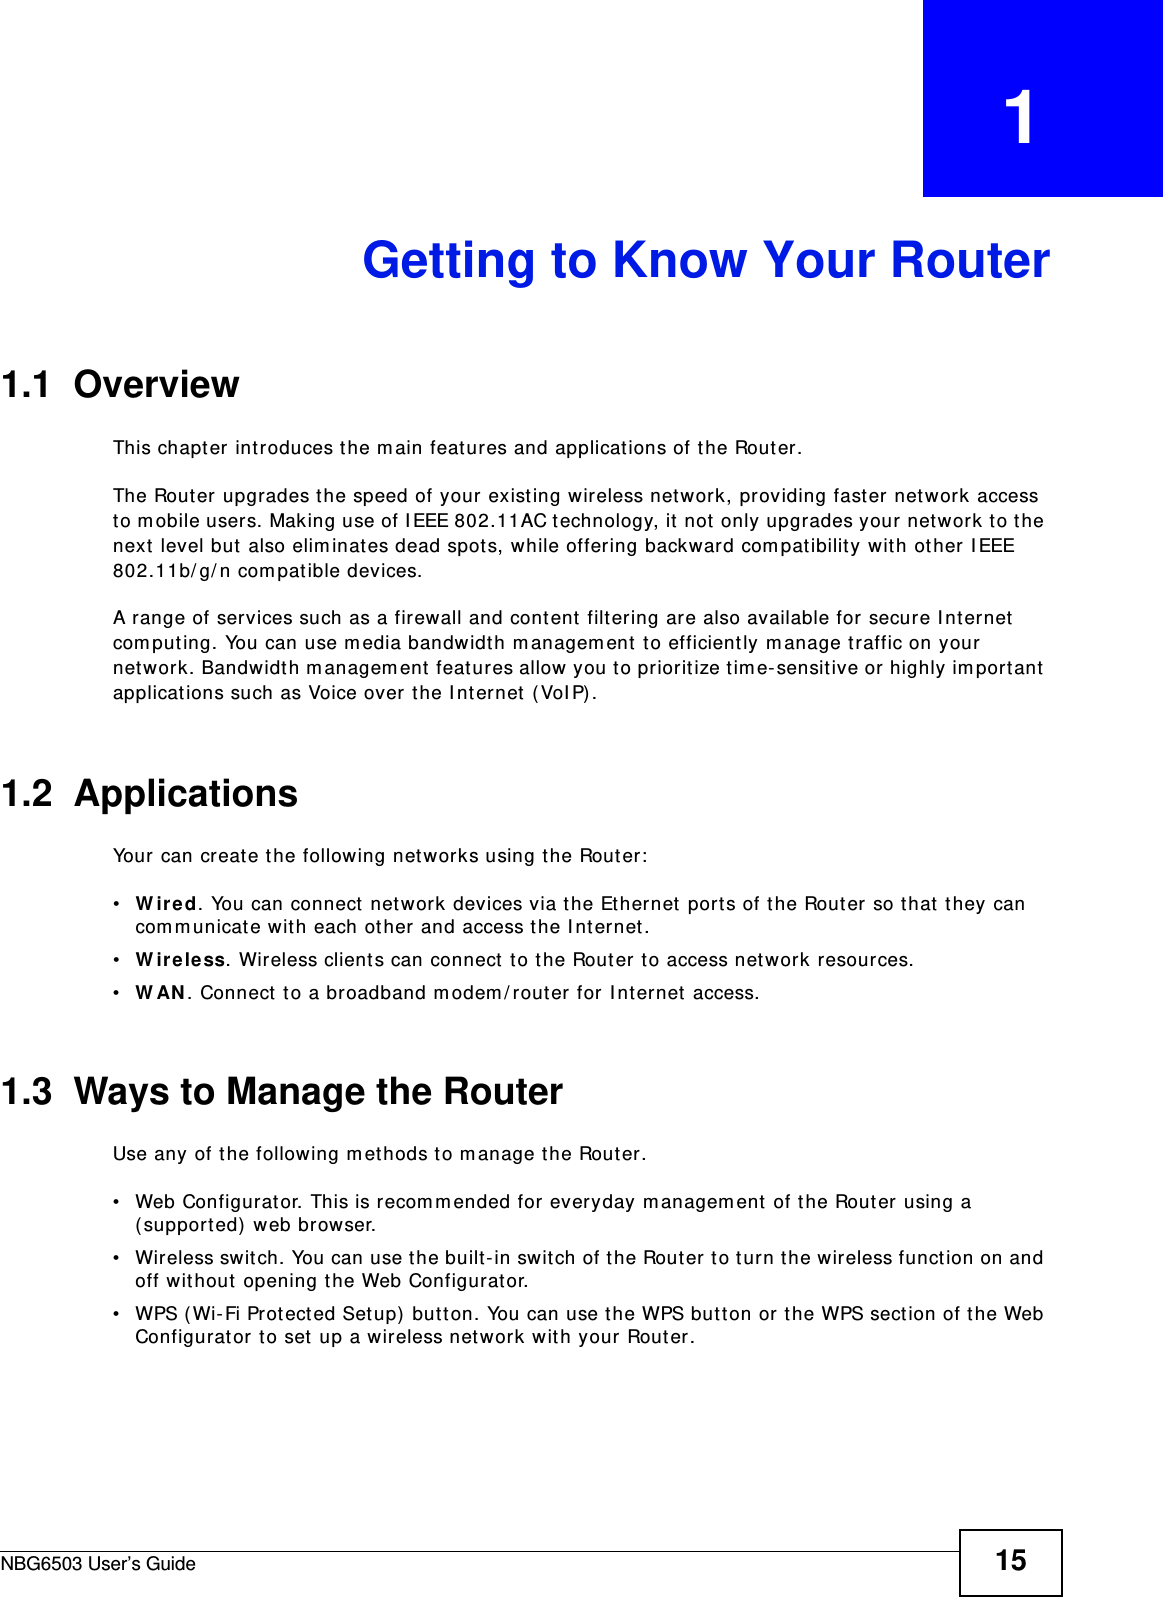 NBG6503 User’s Guide 15CHAPTER   1Getting to Know Your Router1.1  OverviewThis chapter introduces the main features and applications of the Router.The Router upgrades the speed of your existing wireless network, providing faster network access to mobile users. Making use of IEEE 802.11AC technology, it not only upgrades your network to the next level but also eliminates dead spots, while offering backward compatibility with other IEEE 802.11b/g/n compatible devices.A range of services such as a firewall and content filtering are also available for secure Internet computing. You can use media bandwidth management to efficiently manage traffic on your network. Bandwidth management features allow you to prioritize time-sensitive or highly important applications such as Voice over the Internet (VoIP).1.2  ApplicationsYour can create the following networks using the Router:•Wired. You can connect network devices via the Ethernet ports of the Router so that they can communicate with each other and access the Internet.•Wireless. Wireless clients can connect to the Router to access network resources.•WAN. Connect to a broadband modem/router for Internet access. 1.3  Ways to Manage the RouterUse any of the following methods to manage the Router.• Web Configurator. This is recommended for everyday management of the Router using a (supported) web browser.• Wireless switch. You can use the built-in switch of the Router to turn the wireless function on and off without opening the Web Configurator. • WPS (Wi-Fi Protected Setup) button. You can use the WPS button or the WPS section of the Web Configurator to set up a wireless network with your Router.